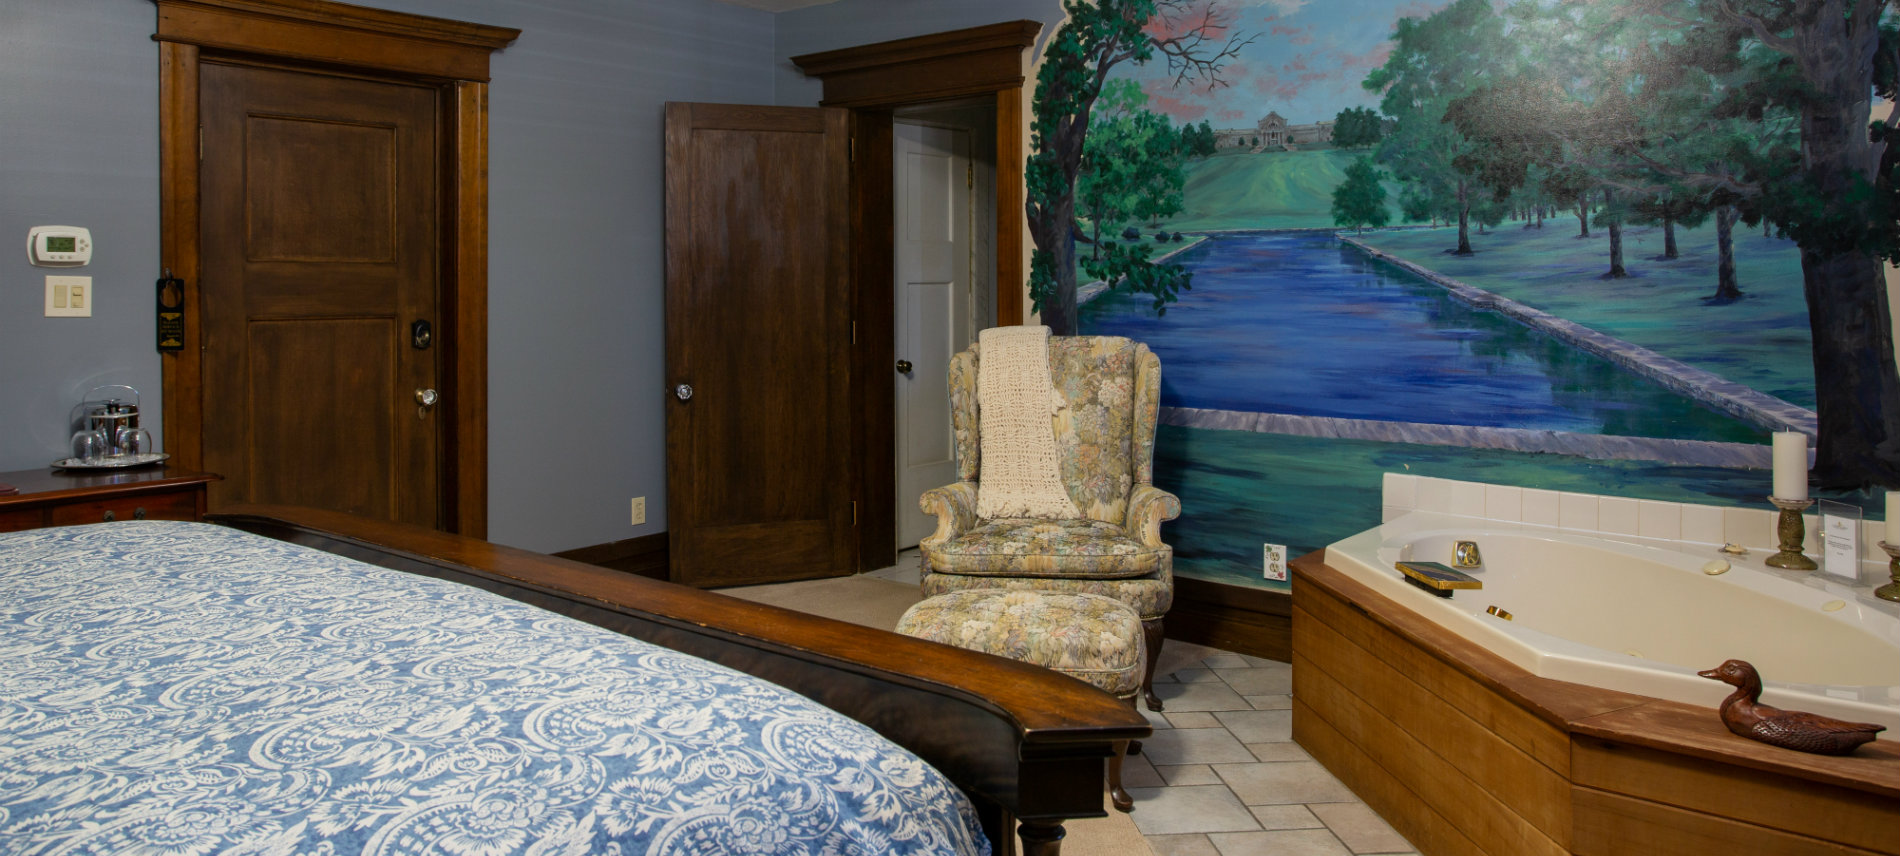 Large Oak bed with paisley comforter, two person jetted tub in front of painted mural